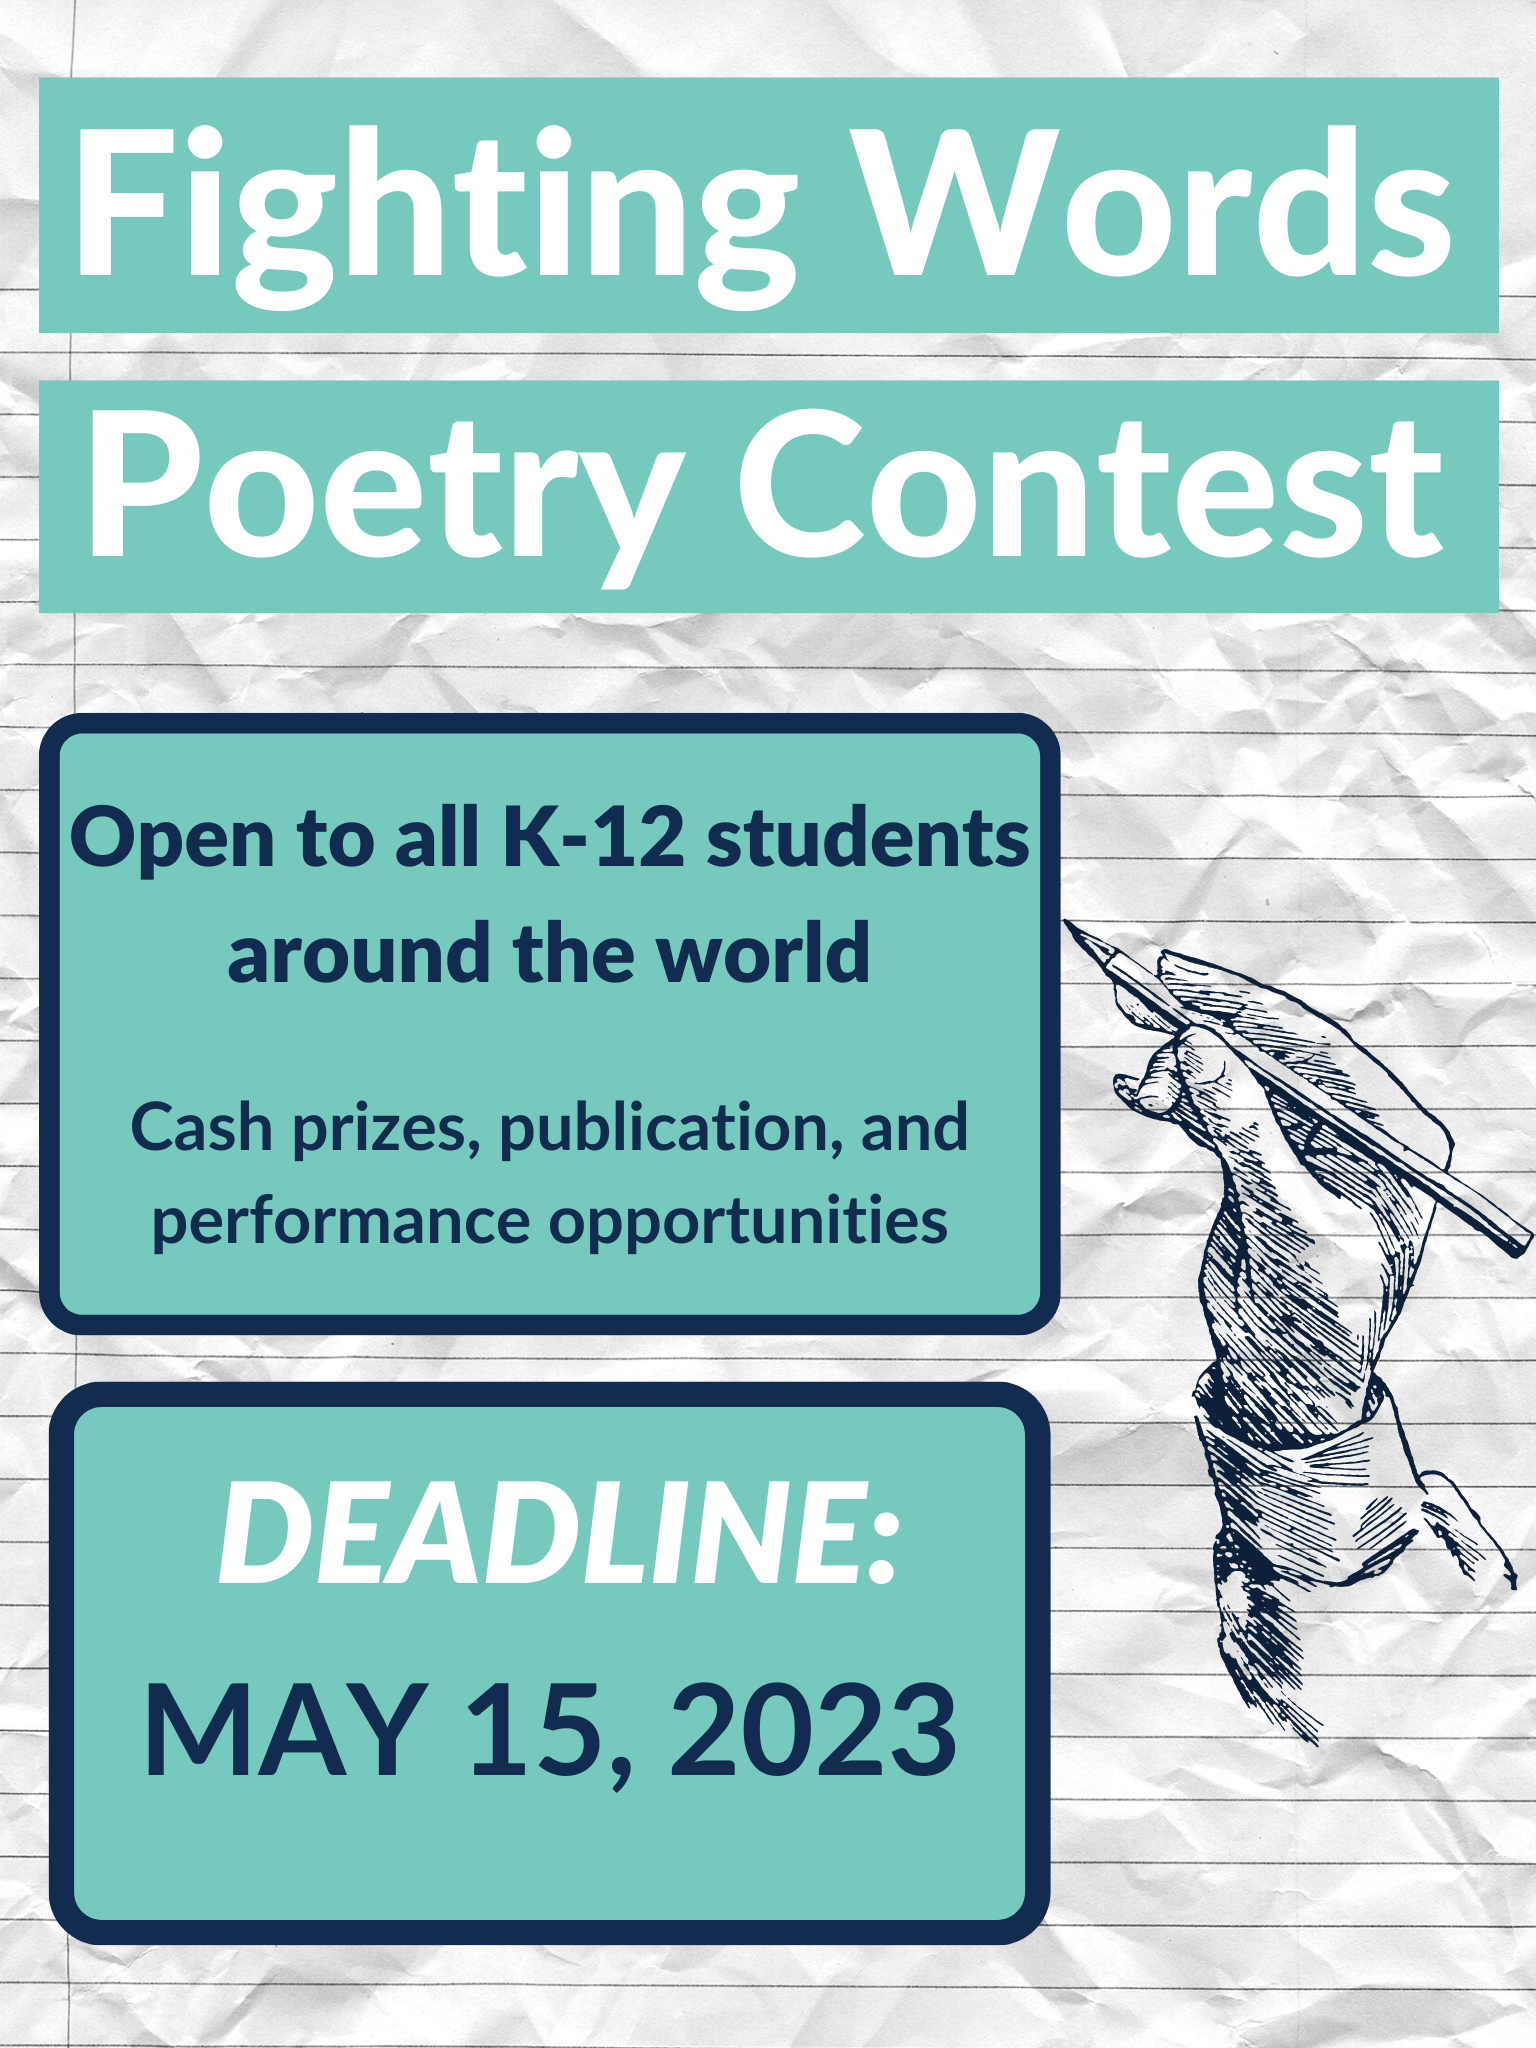 Fighting Words Poetry Contest and